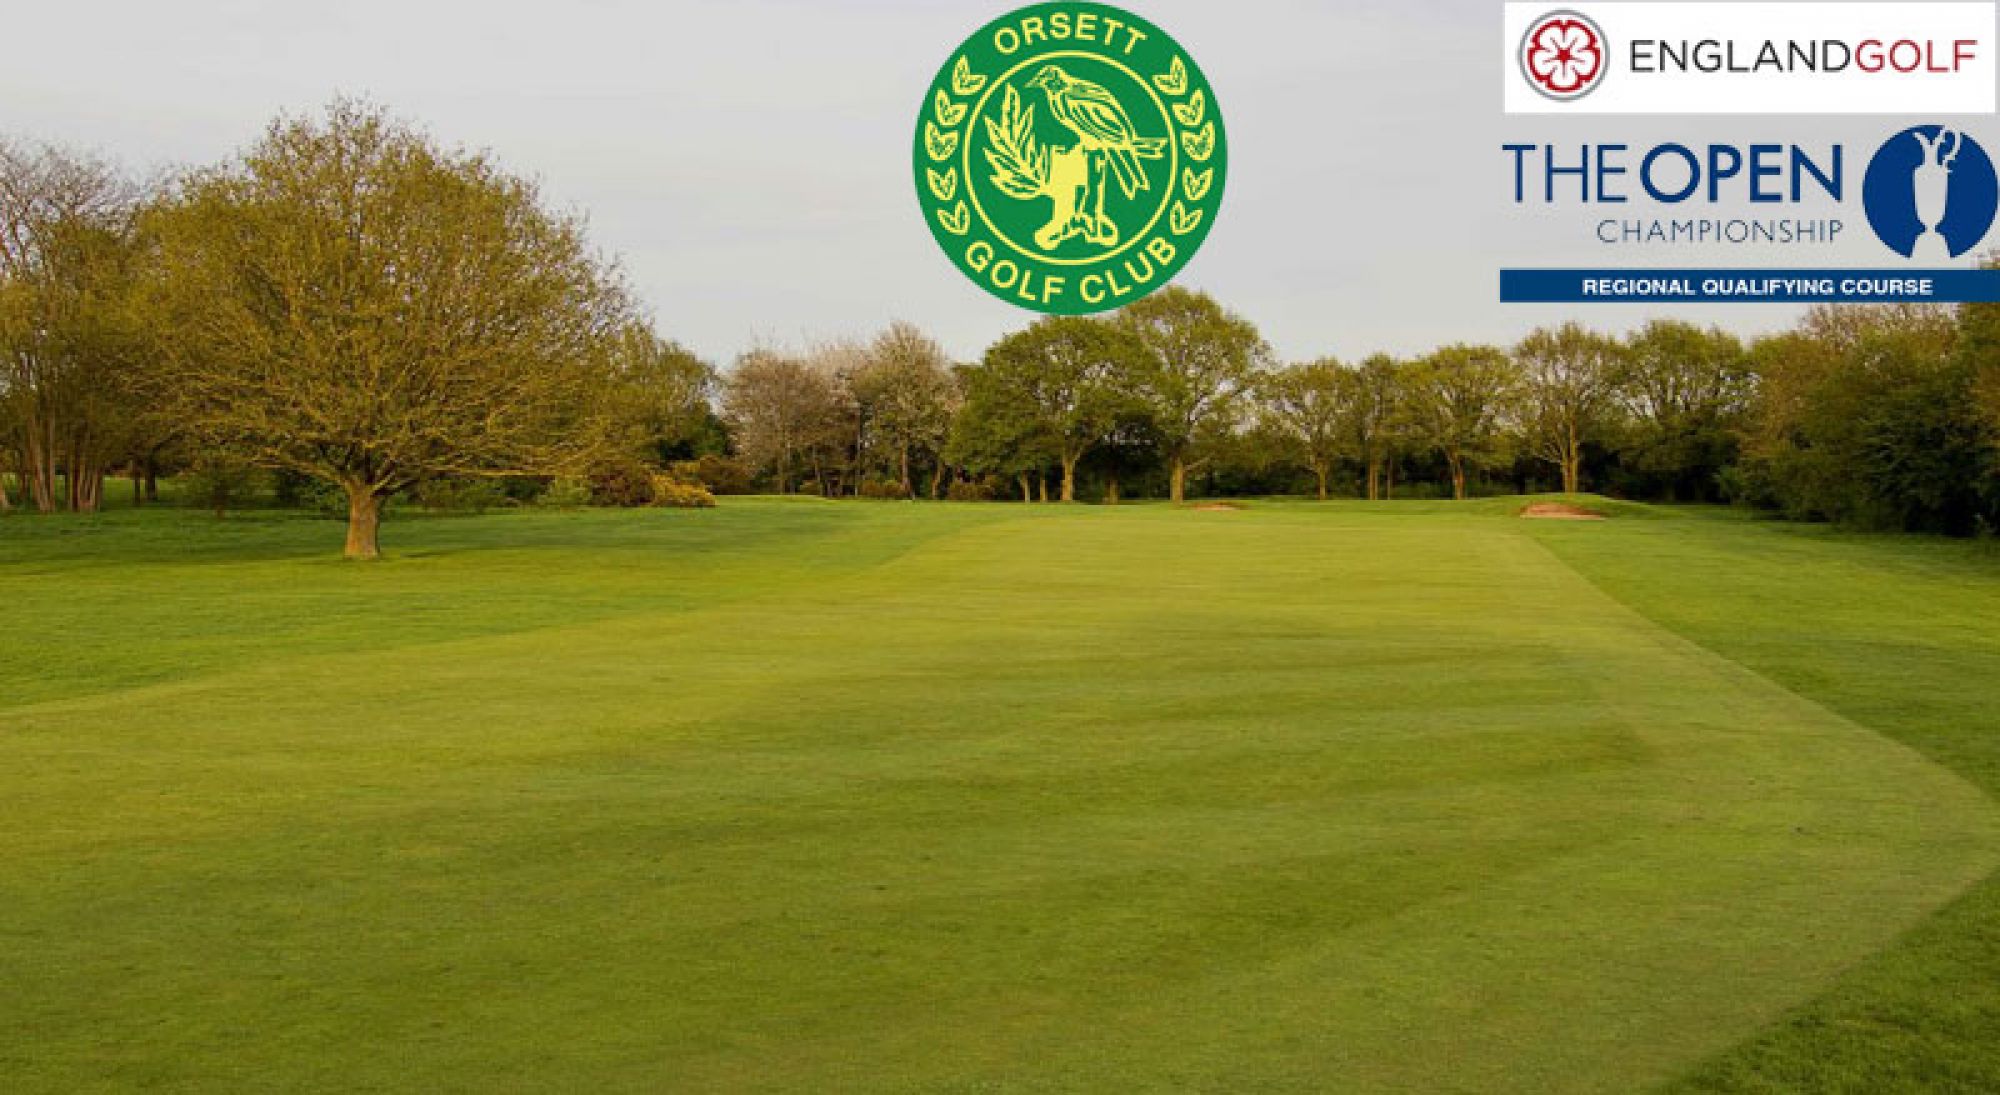 View Orsett Golf Club's lovely golf course in vibrant Essex.